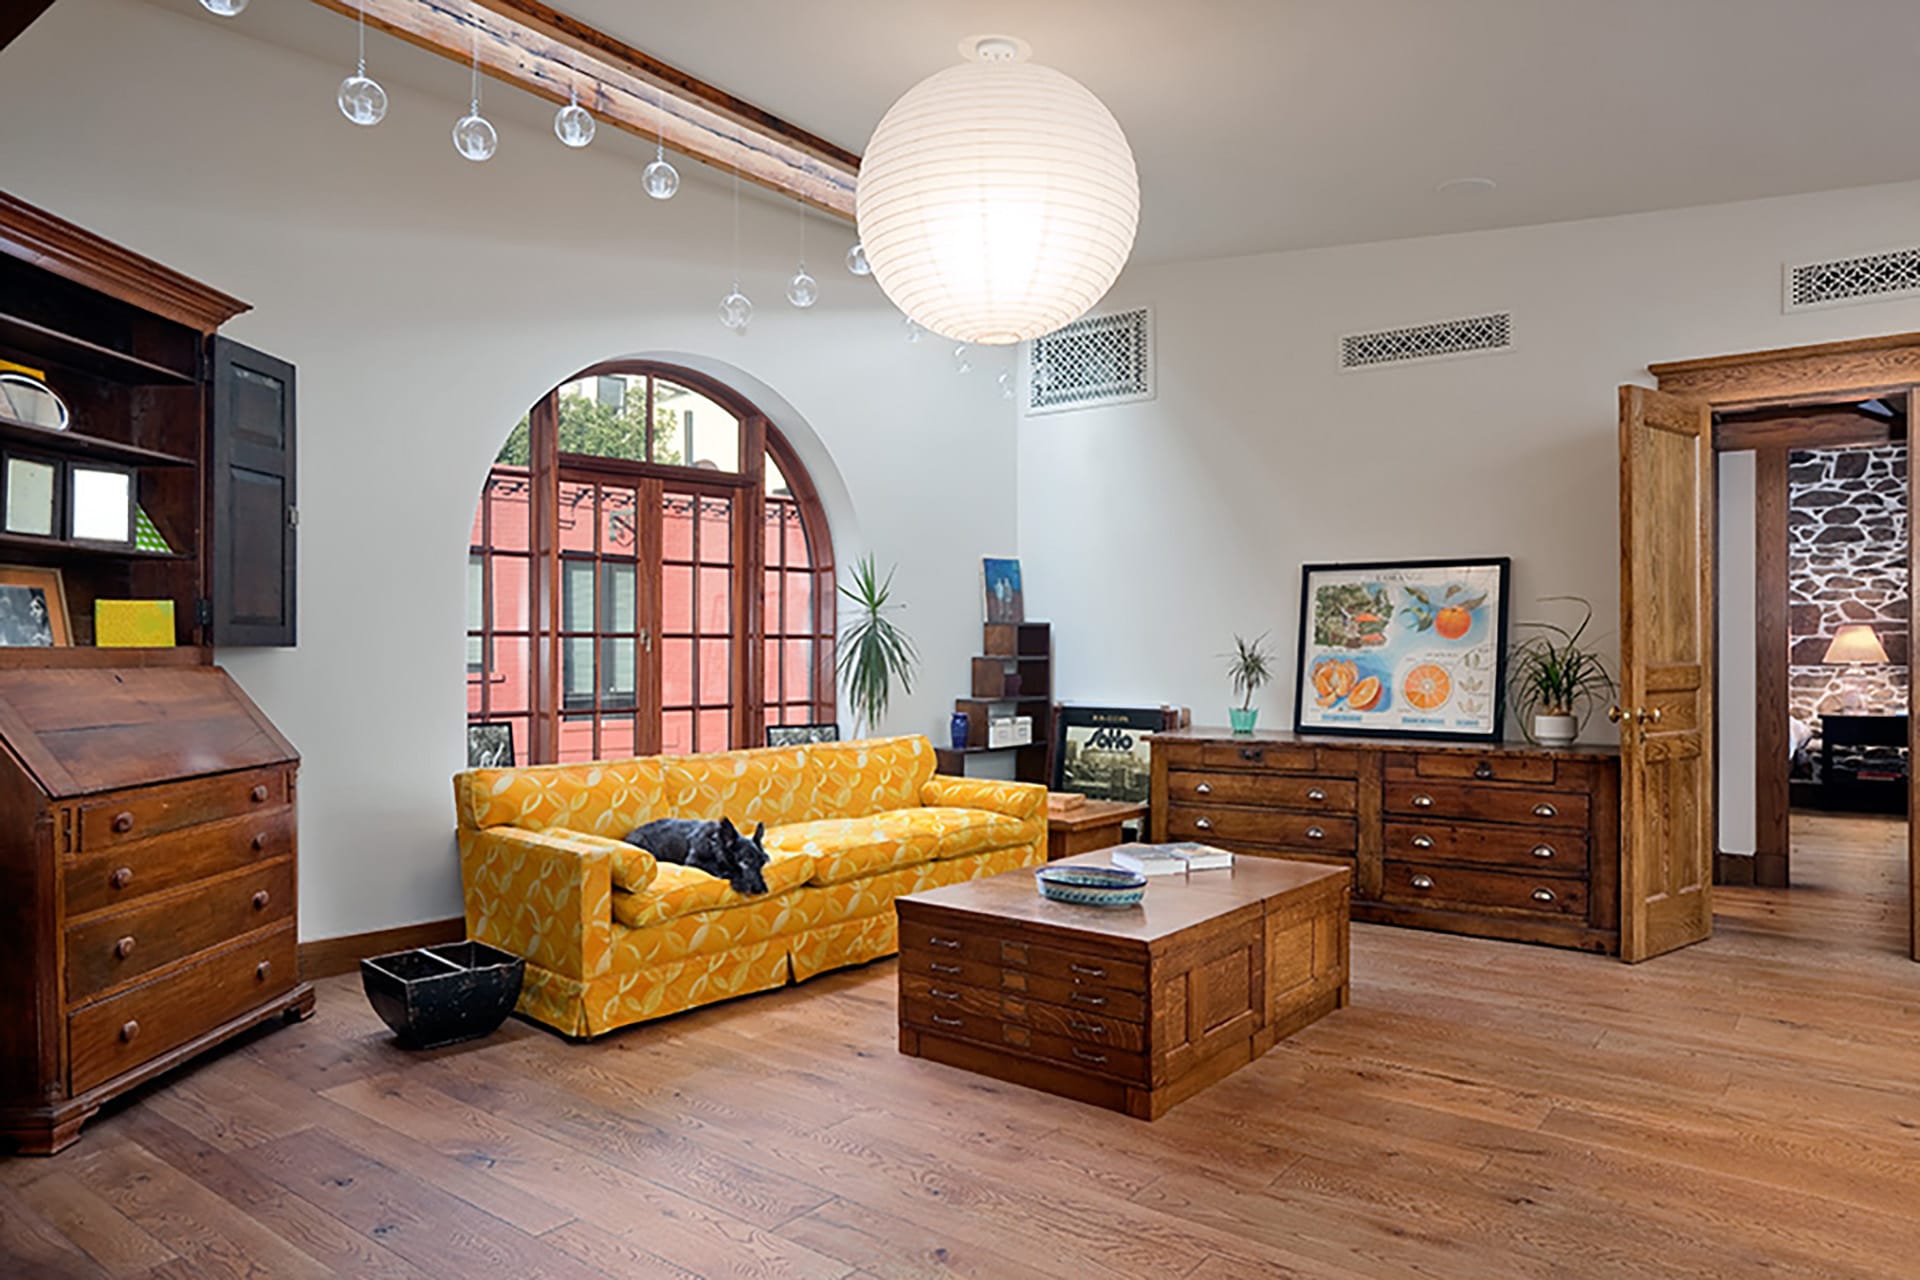 Yellow couch in front of a round window with traditional wood furnishings and a large spherical light fixtures.